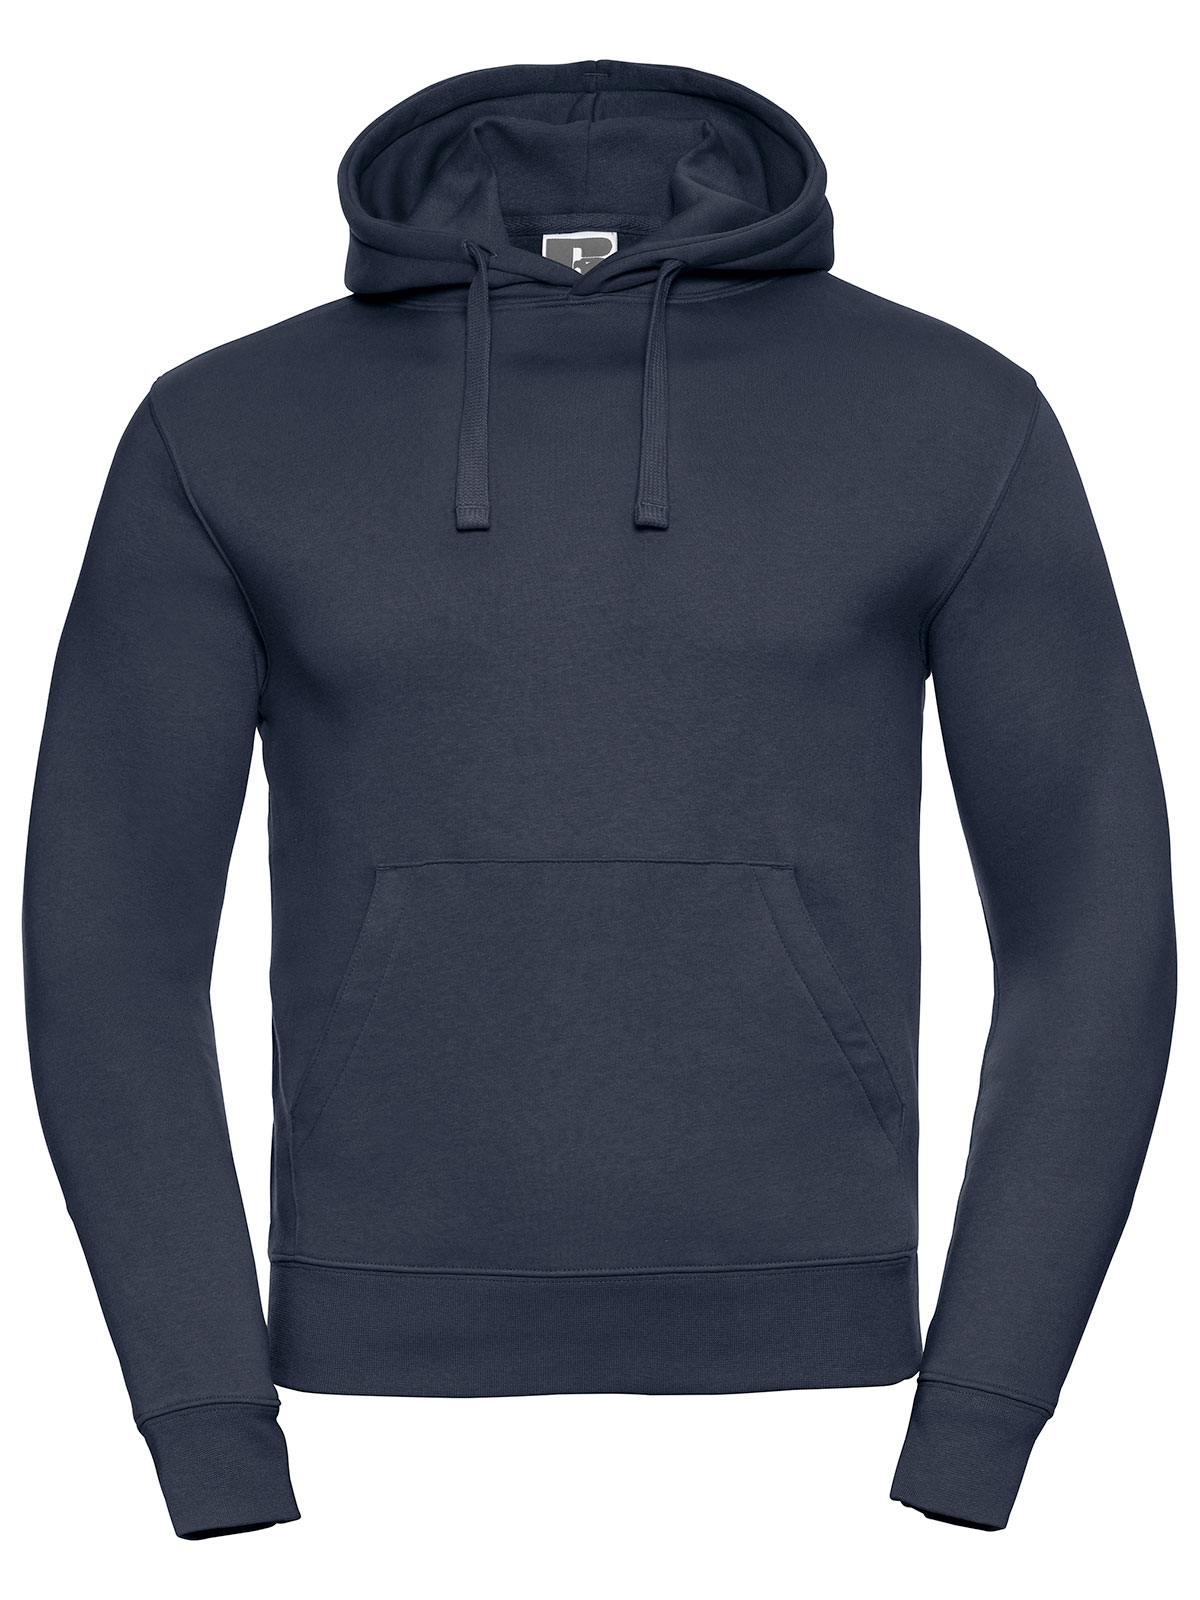 mens-authentic-hooded-sweat-french-navy.webp